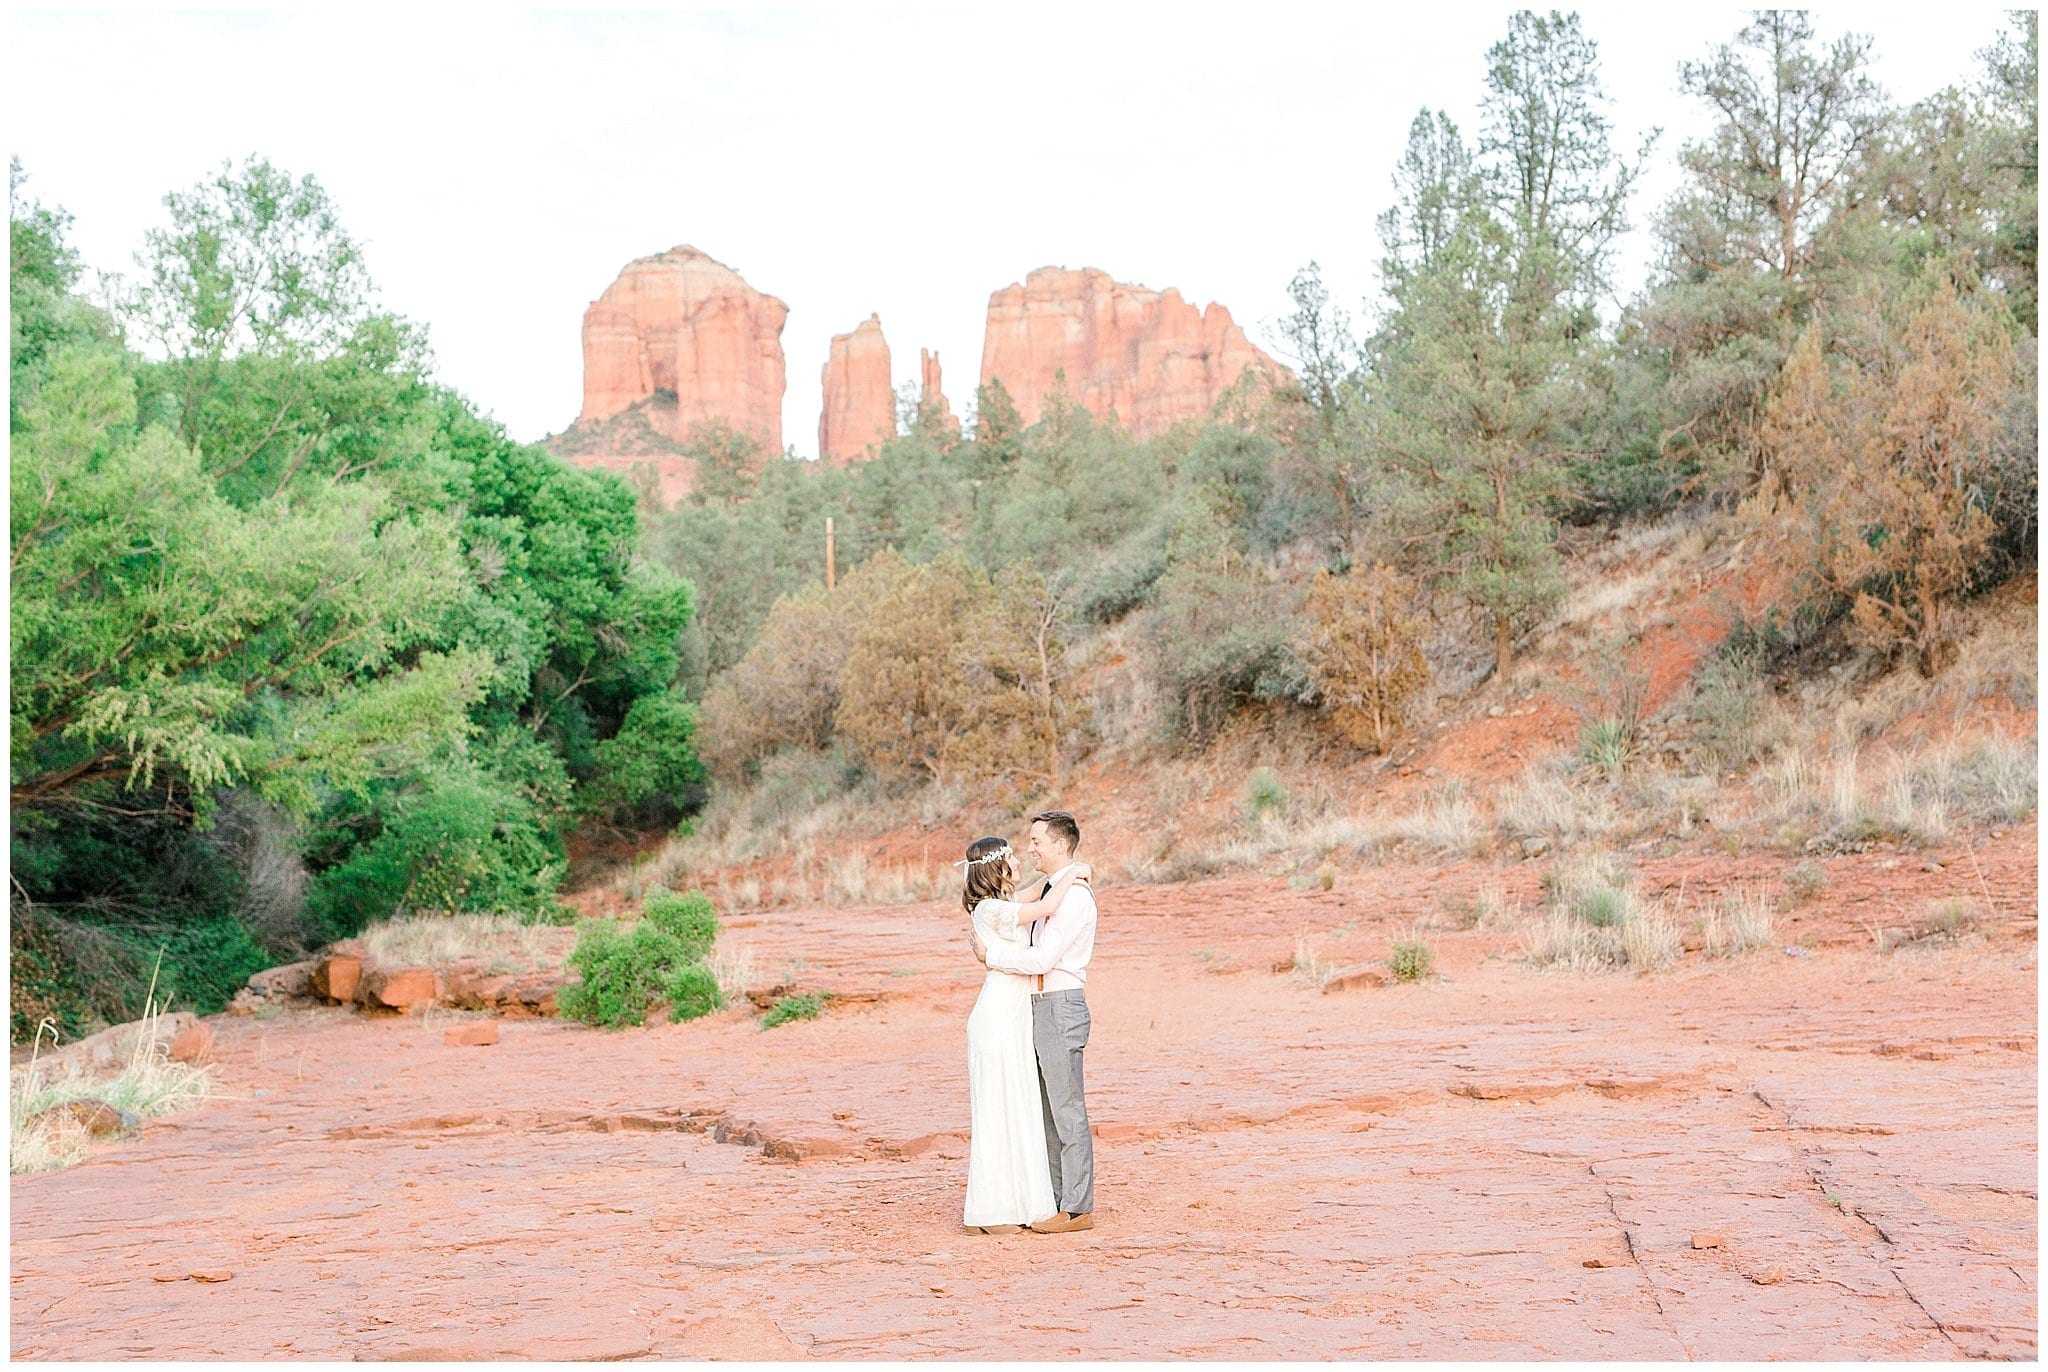 dancing with red rocks in background